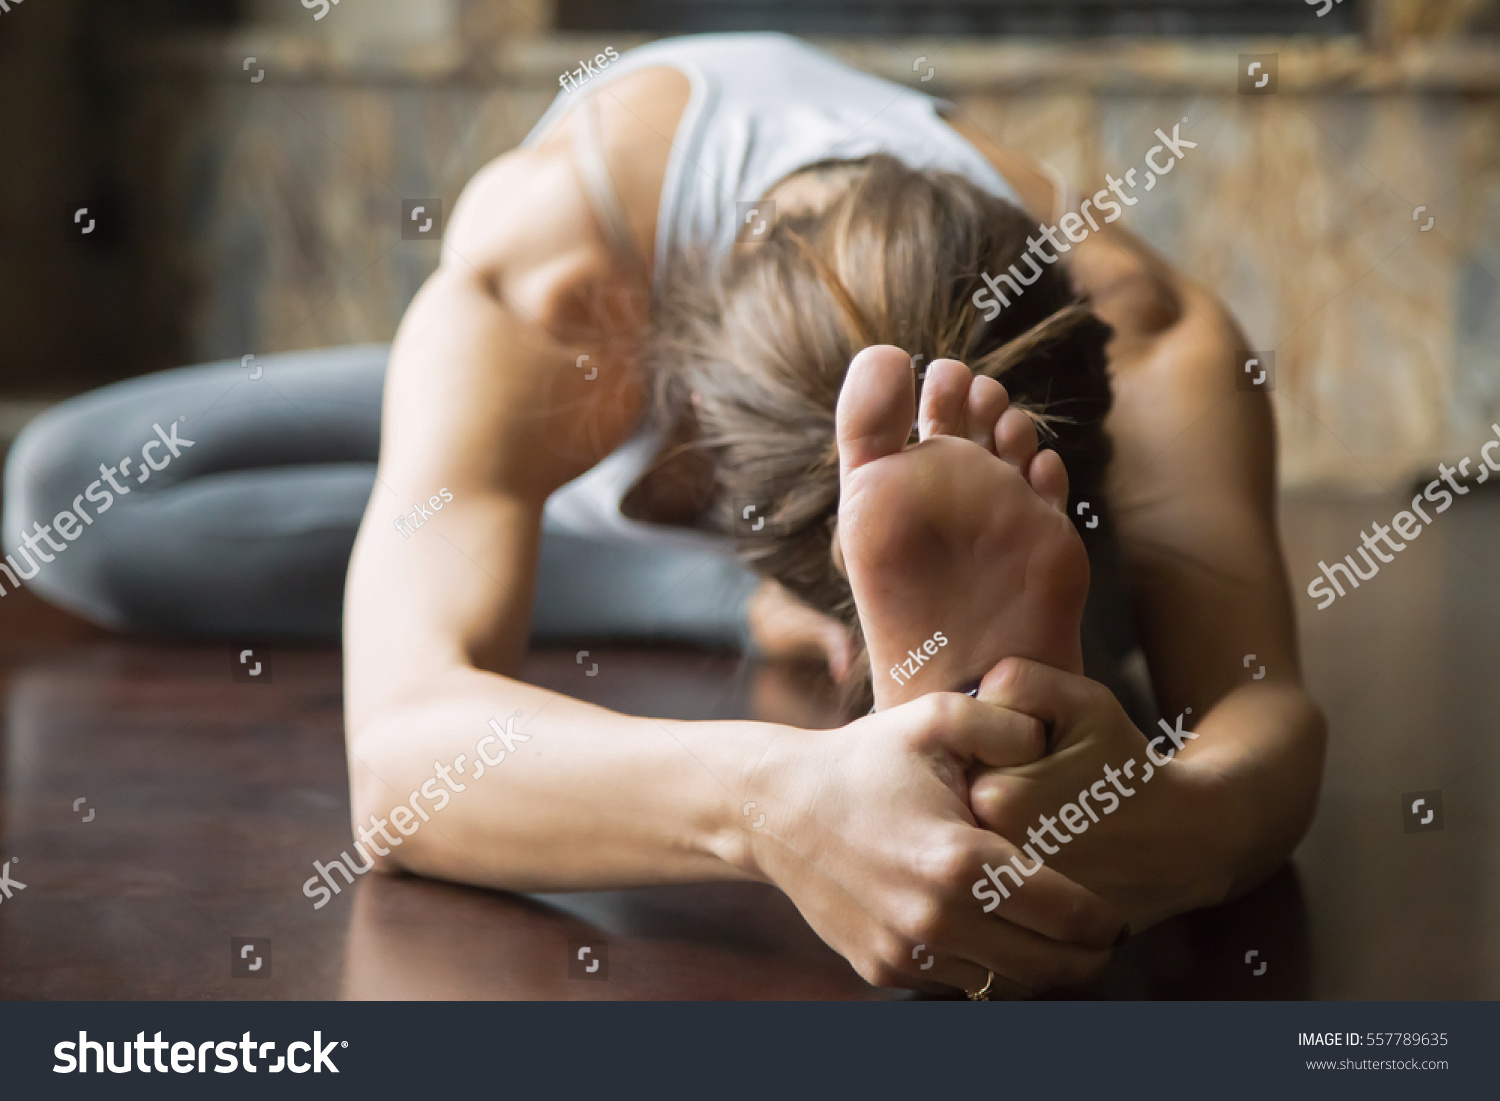 Close up of young woman practicing yoga, sitting in Head to Knee Forward Bend exercise, Janu Sirsasana pose, working out, wearing sportswear, grey pants, bra, indoor, home interior background #557789635